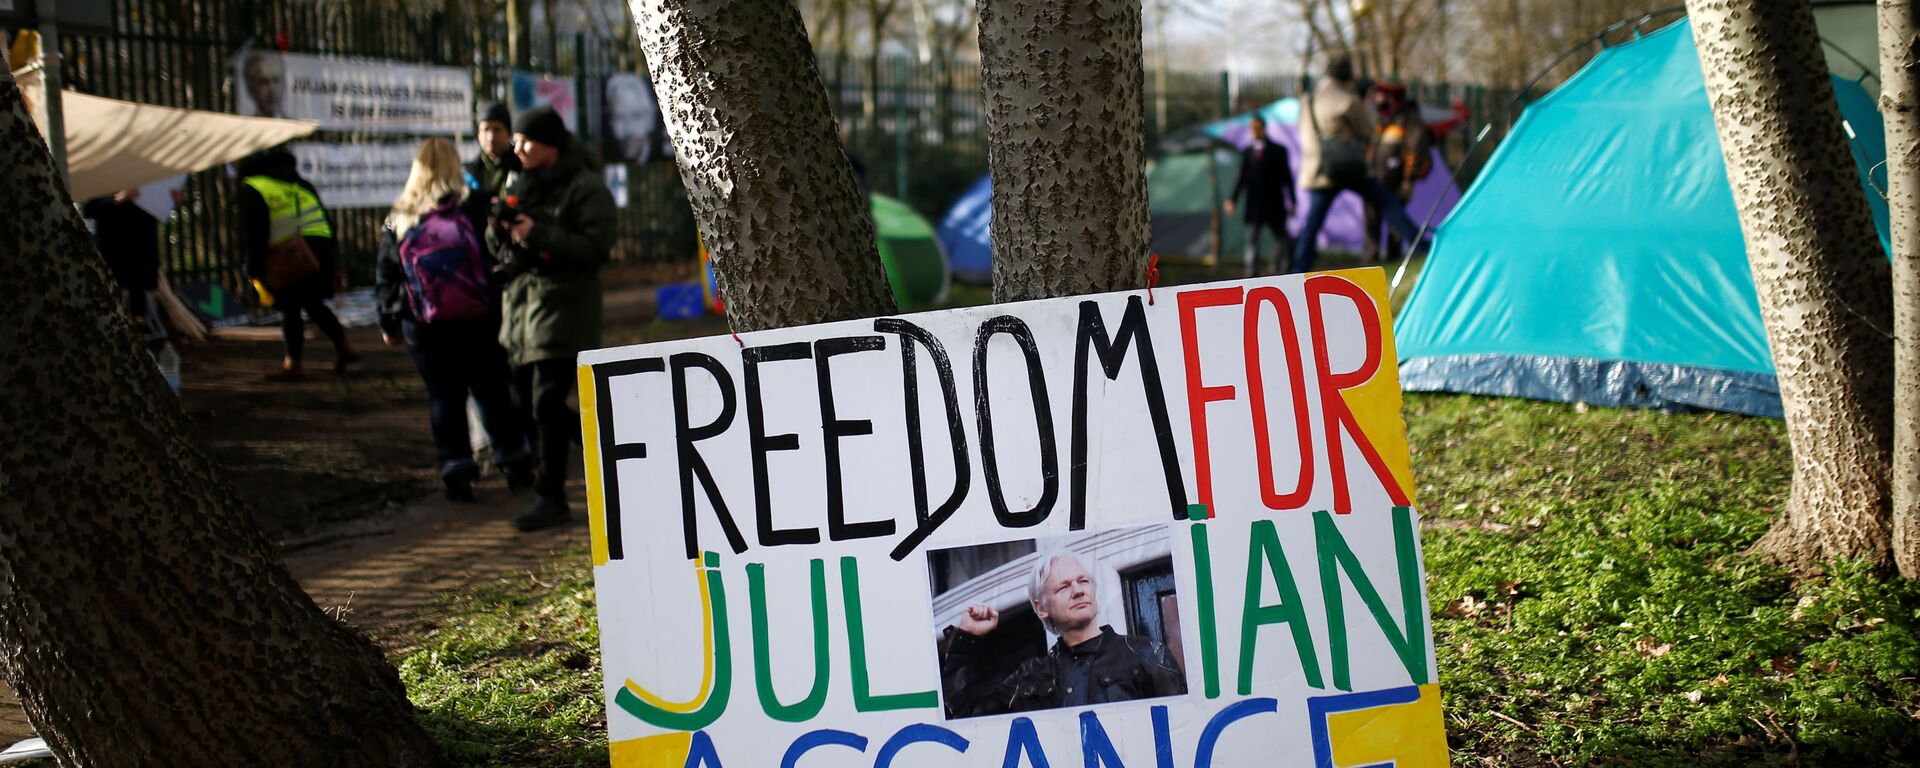 A sign in support of WikiLeaks founder Julian Assange sits near a camp set up by protesters outside Woolwich Crown Court, ahead of a hearing to decide whether Assange should be extradited to the United States, in London, Britain February 25, 2020. - Sputnik International, 1920, 25.02.2020